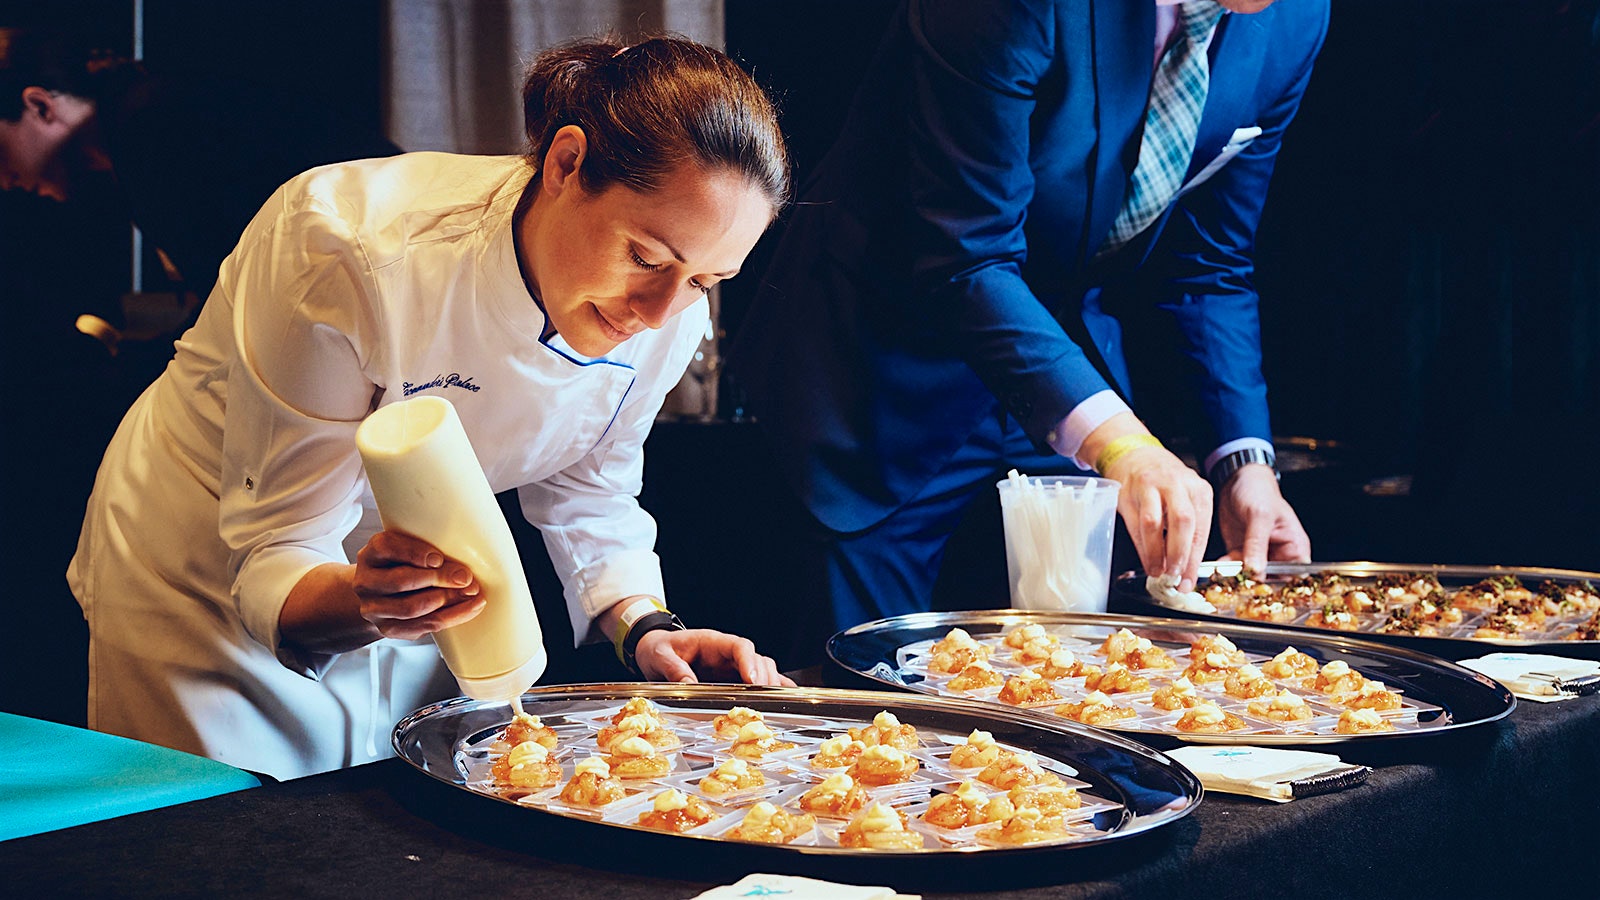  Commander’s Palace executive chef Meg Bickford finishes a shrimp dish at the Wine Spectator Grand Tour in New Orleans.